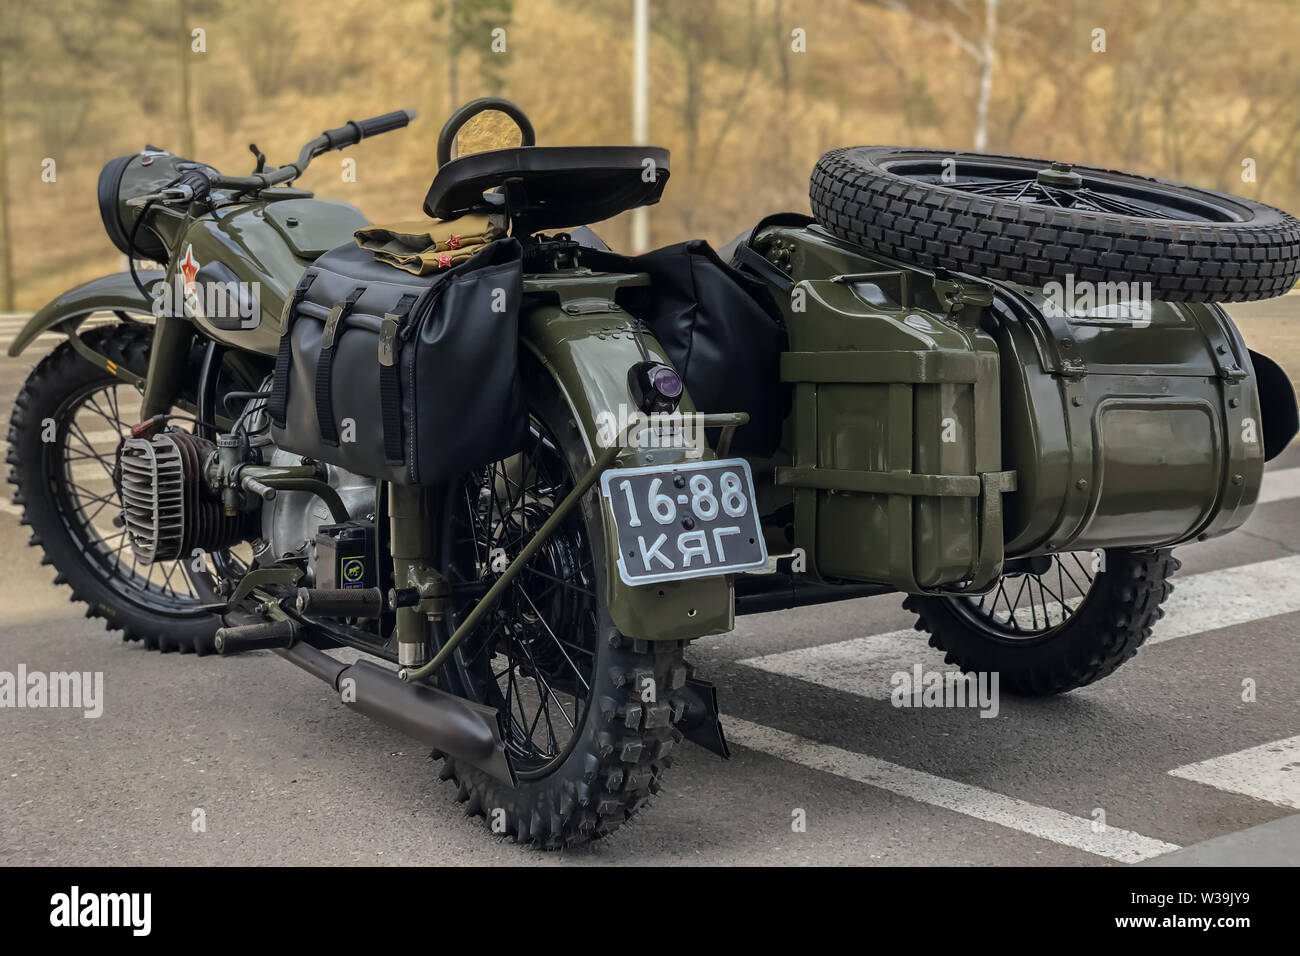 Russian retro motorcycle URAL khaki. Moto during the second world war with Soviet symbols Stock Photo